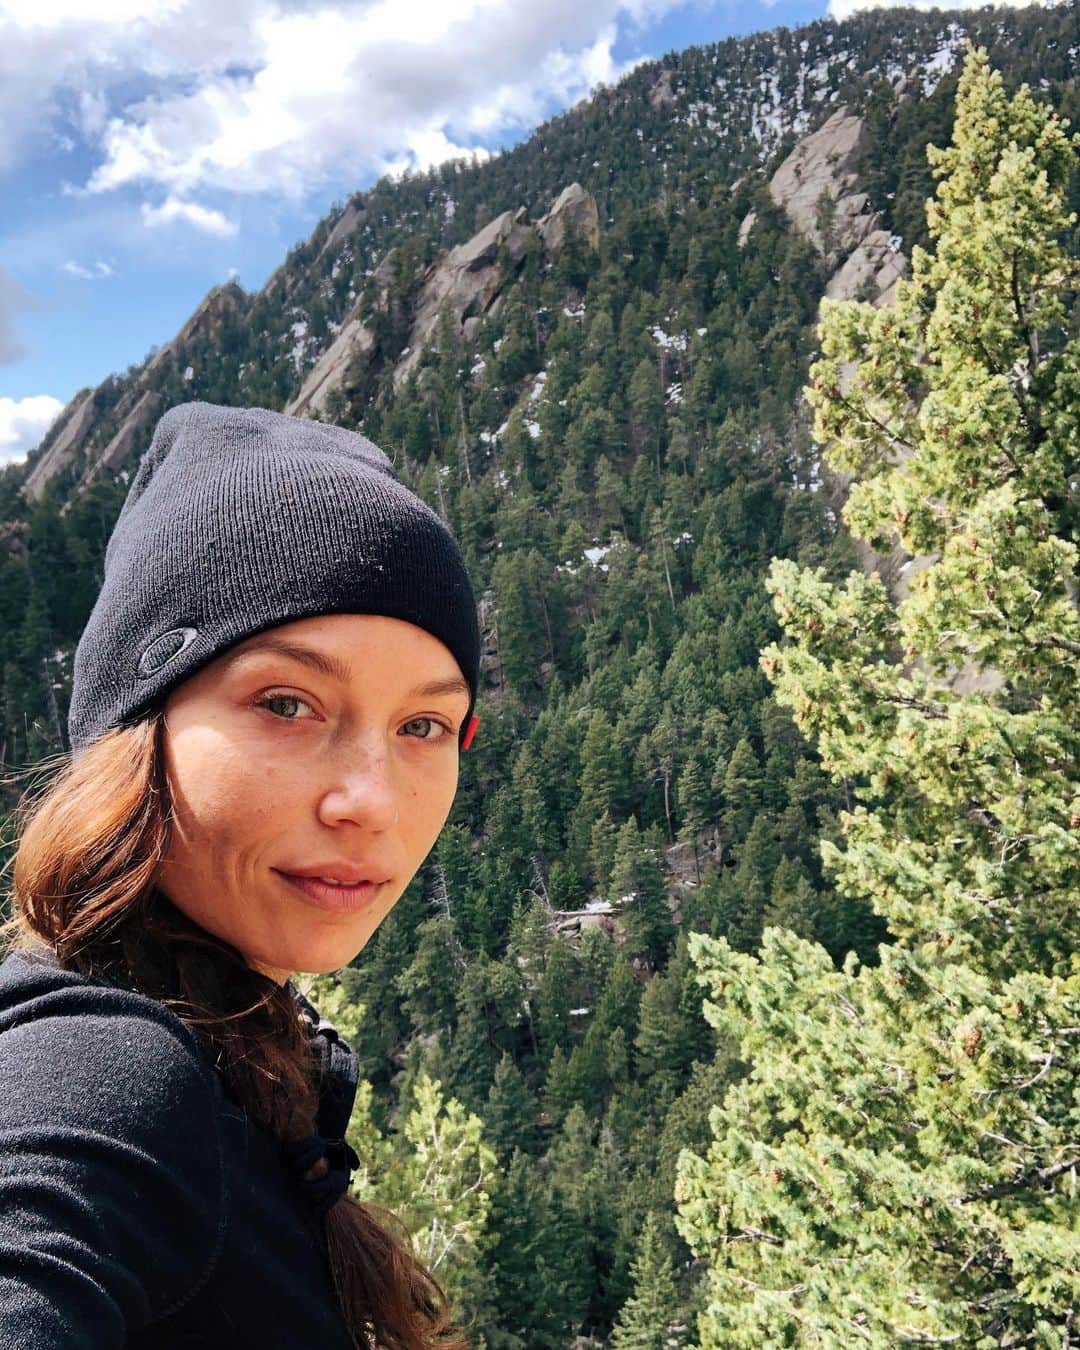 Nicole Mejiaのインスタグラム：「Who wants to join me for a week in nature next year?🧘🏽‍♀️⛺️🏜  I’ll be leading a 5 day trip to Zion National Park, Utah September 12-16, 2021.  Spots open tomorrow at 12:00pm ET exclusively to those who requested to receive first access! You can get on that list in my story.🙃  We are glamping with @undercanvasofficial!  Trip itinerary:  Day 1️⃣: Sunday, Sept 12 - Arrive in Vegas and take a 12pm or 3:30pm complimentary transfer to the campsite - Tent check-in and gift bags - Welcome dinner  Day 2️⃣: Monday, Sept 13 - Morning movement and meditation - Breakfast on site - 1/2 day canyoneering trip - Women’s circle (more deets to come!) - Lunch and dinner provided  Day 3️⃣: Tuesday, Sept 14 - Morning movement and meditation - Breakfast on site - It’s a free day! Hike, relax, explore! - Group dinner  Day 4️⃣: Wednesday, Sept 15 - Morning movement and meditation - Breakfast on site - Optional kayak or paddle board session - Women’s circle (more deets to come!) - Farewell dinner - S’mores, drinks, and a sunset dance party 🌄  Day 5️⃣: Thursday, Sept 16 - Morning flow and gratitude meditation - Breakfast on site - Transfer to airport at 10:00am (why did i just get sad at the thought of it ending!?! 😭)  I’ll launch to insta and our @lulyapp community on Monday if there are spots left!  Ps. @noelle_m & @bekindtothemind will be present as well! 💓🙏🏼  A few more deets: - price for the first 10: $1988 - price for the remaining 20: $2188 - The first 10 people to register will get $200 off.  - 25% of the total price is due upfront to reserve your spot. - For the remaining balance, you have the option of paying with a 6, 12, or 18 month payment plan. - flights are not included but transportation from Las Vegas McCarran airport to the park are. - All meals are included minus 2 lunches since most of us will be out exploring! - there will be veggie and vegan options available.   I just got so hype writing this out. 😍 Connecting with nature has become the most authentic and soul-filling part of my life these days. I am filled with gratitude to be able to share in it with 30 women from this community.  Thank you for making this possible, @trovatrip. ✨」